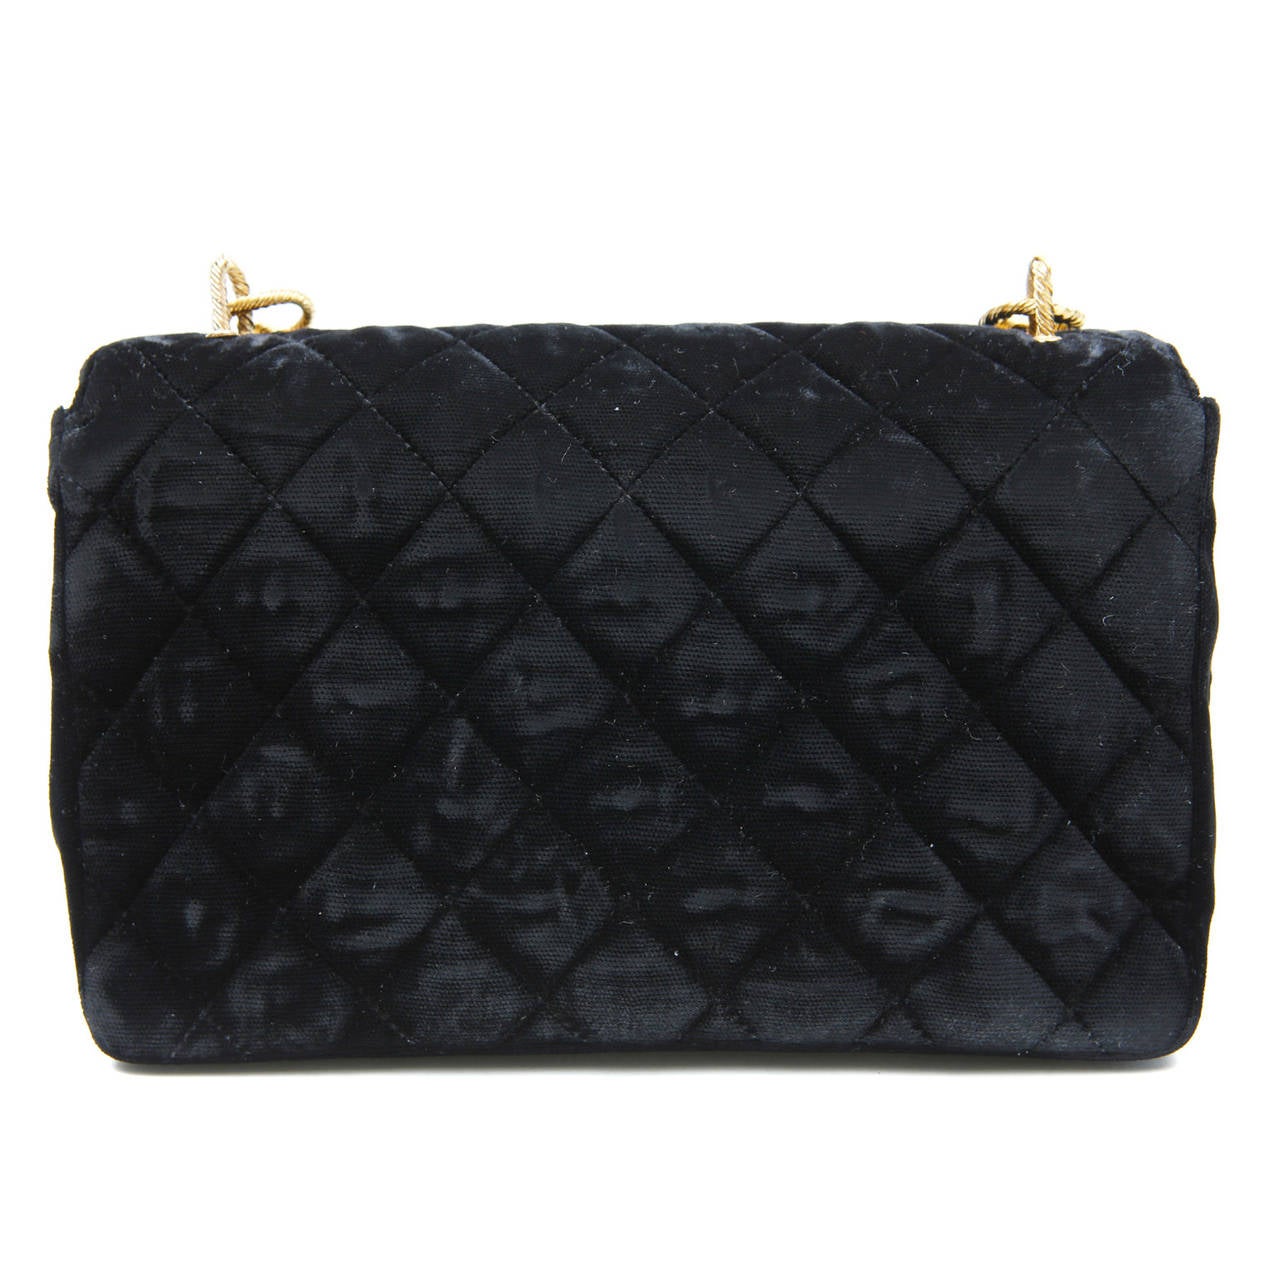 Chanel Black Vintage Velvet Gripoix Evening Bag - pristine condition; a beautiful collectible.  
The classic style exudes elegance designed in rich velvet with opulent gemstones.
 
Black velvet small bag is quilted in signature Chanel diamond